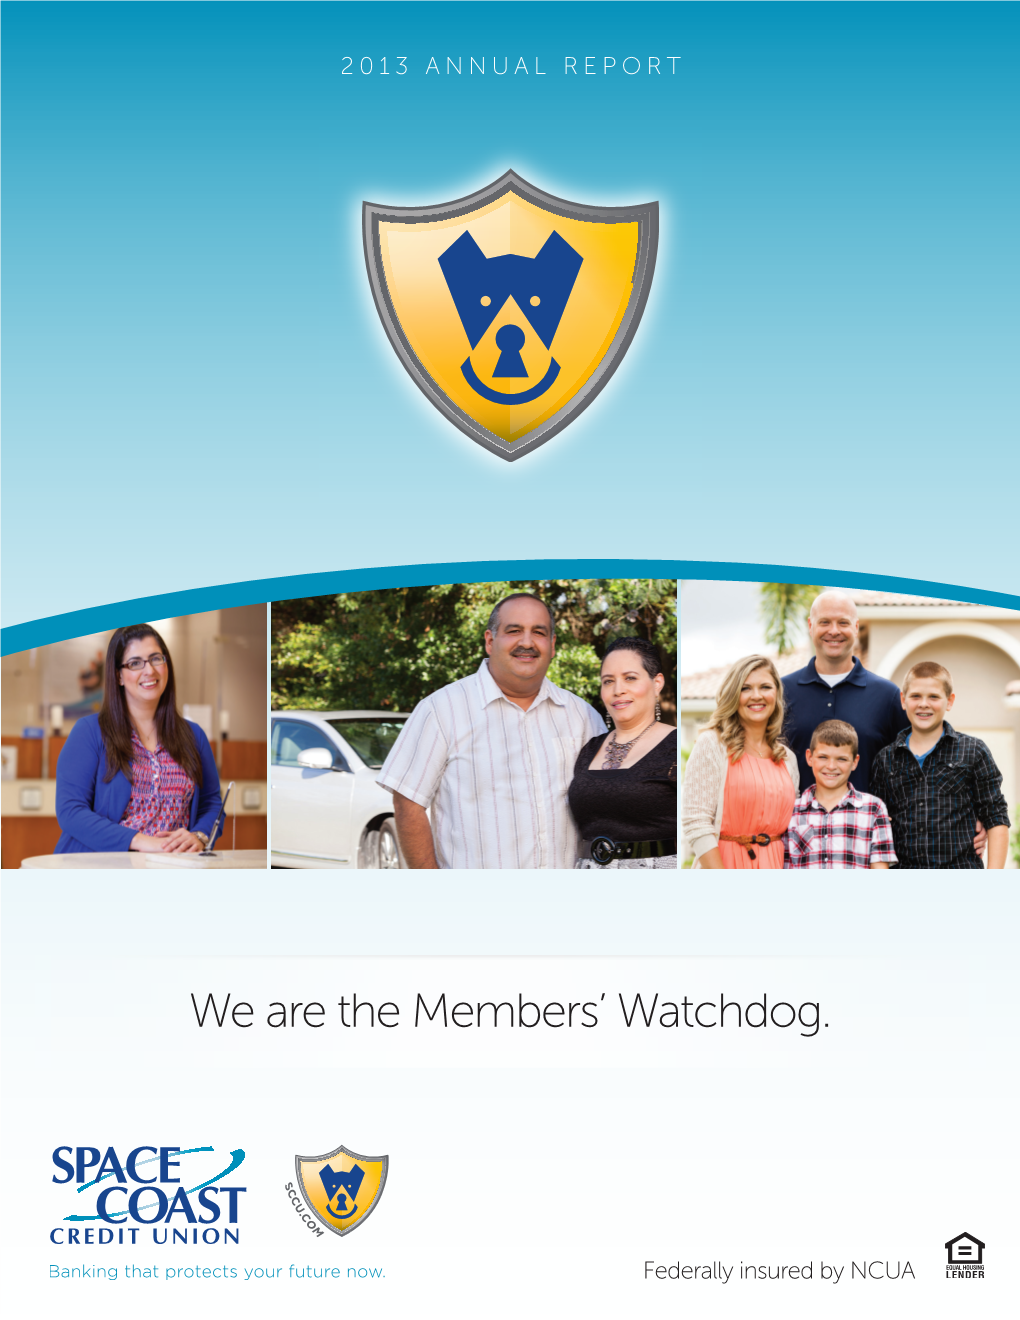 We Are the Members' Watchdog